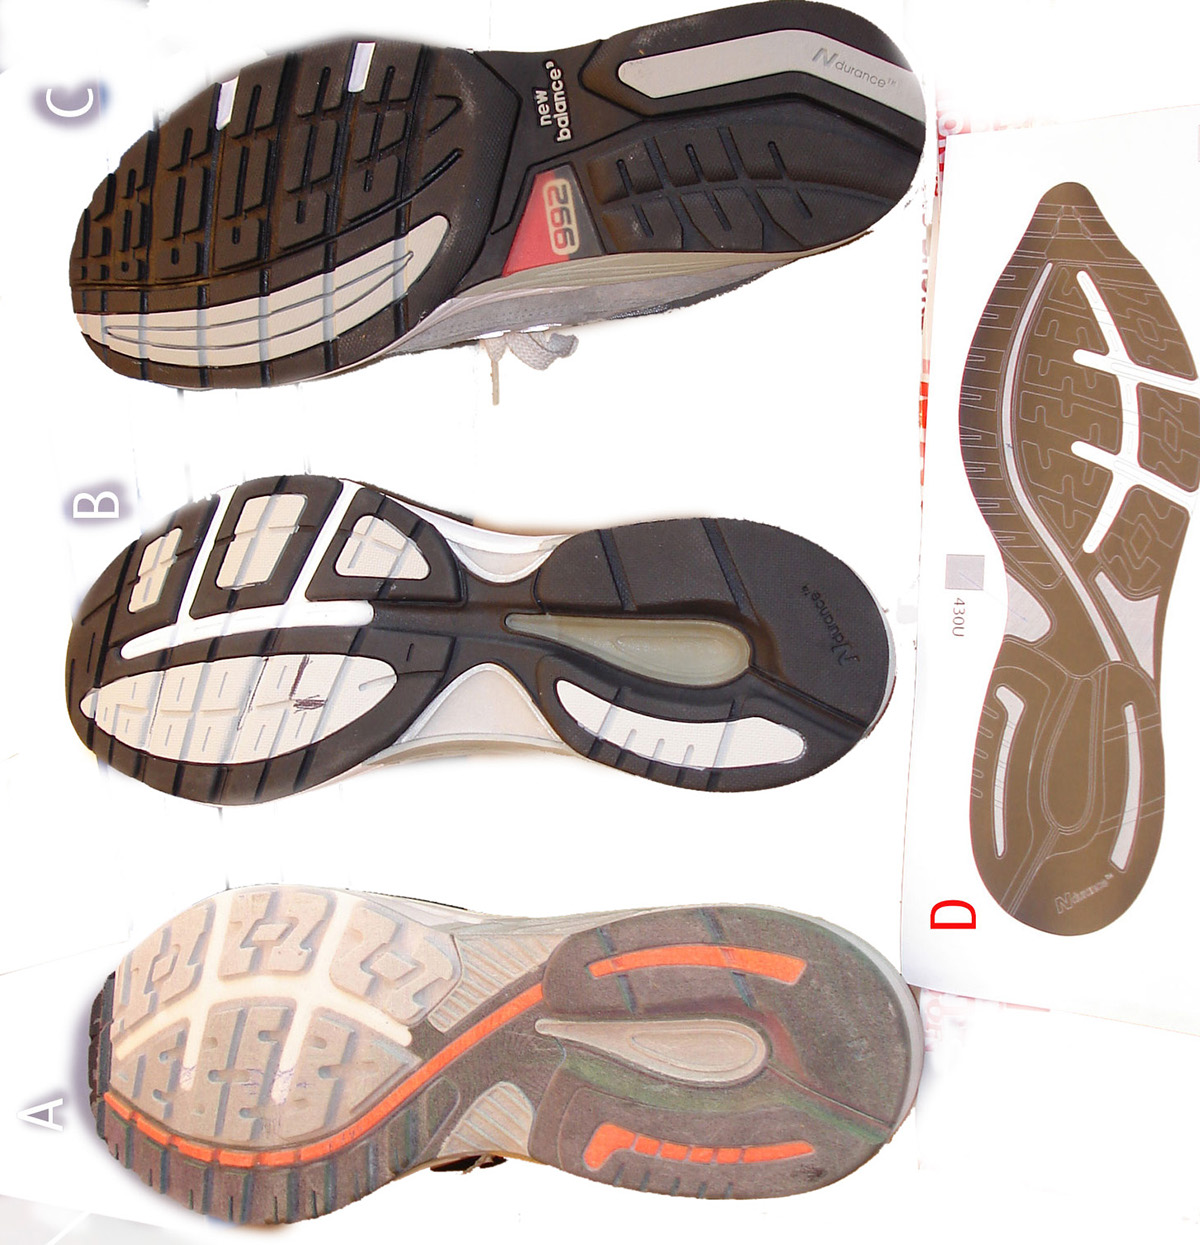 footwear sole technical cad sole design shoe concepts pattern OUTSOLE rubber vulcanized technical running